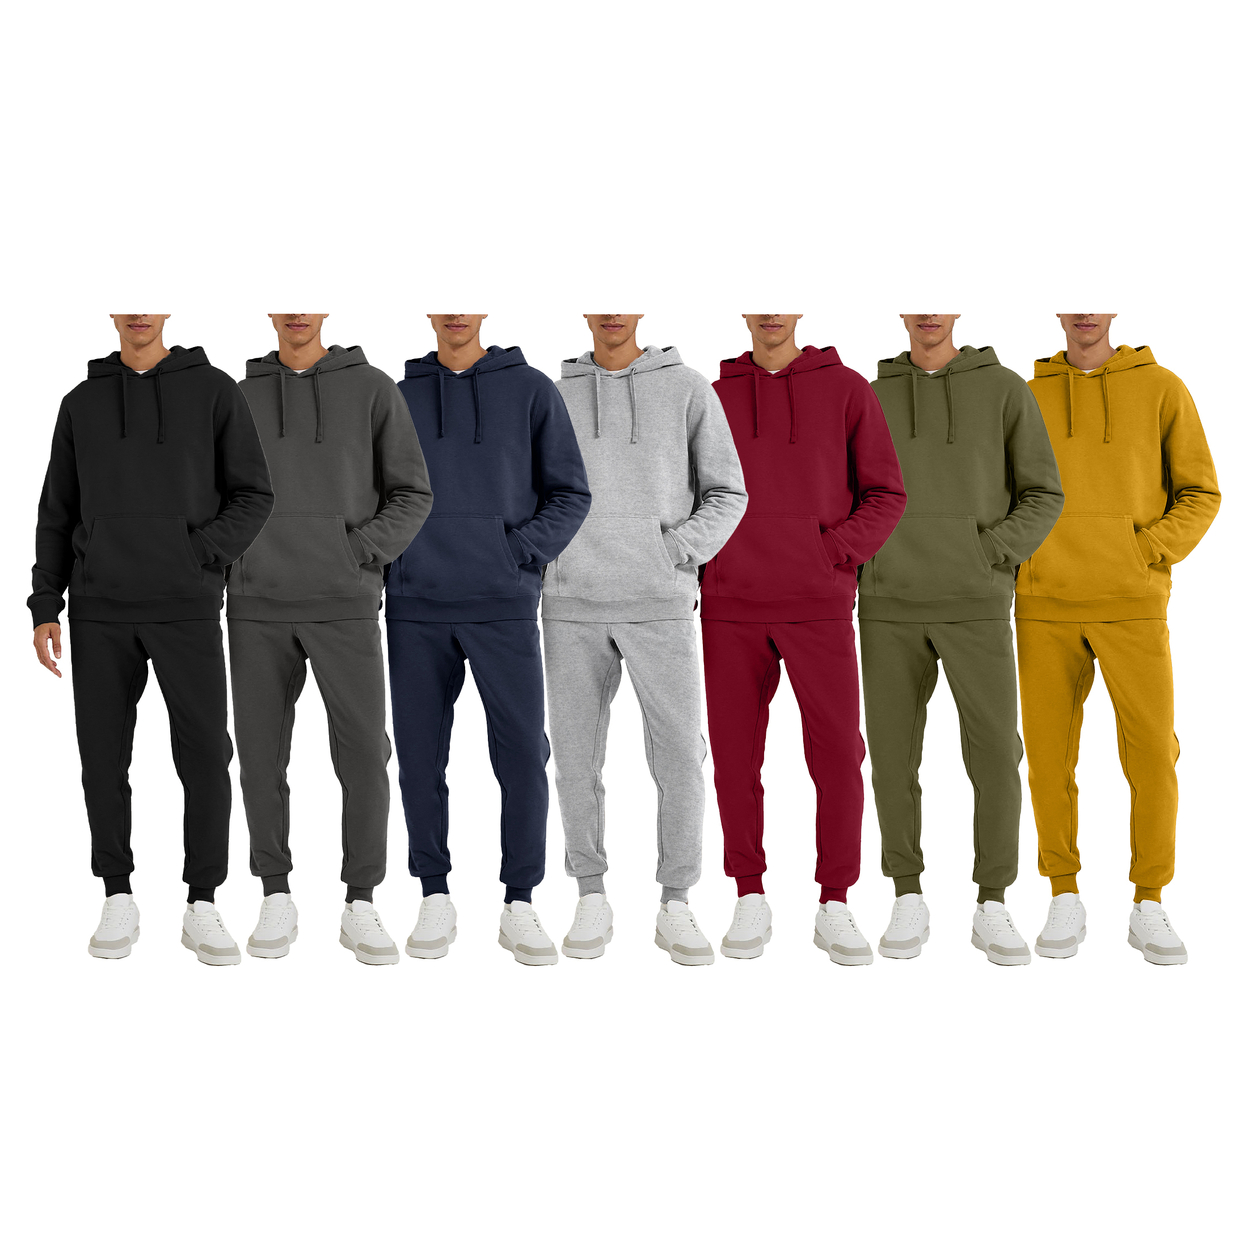 Multi-Pack: Men's Big & Tall Athletic Active Jogging Winter Warm Fleece Lined Pullover Tracksuit Set - Charcoal, 1-pack, Medium